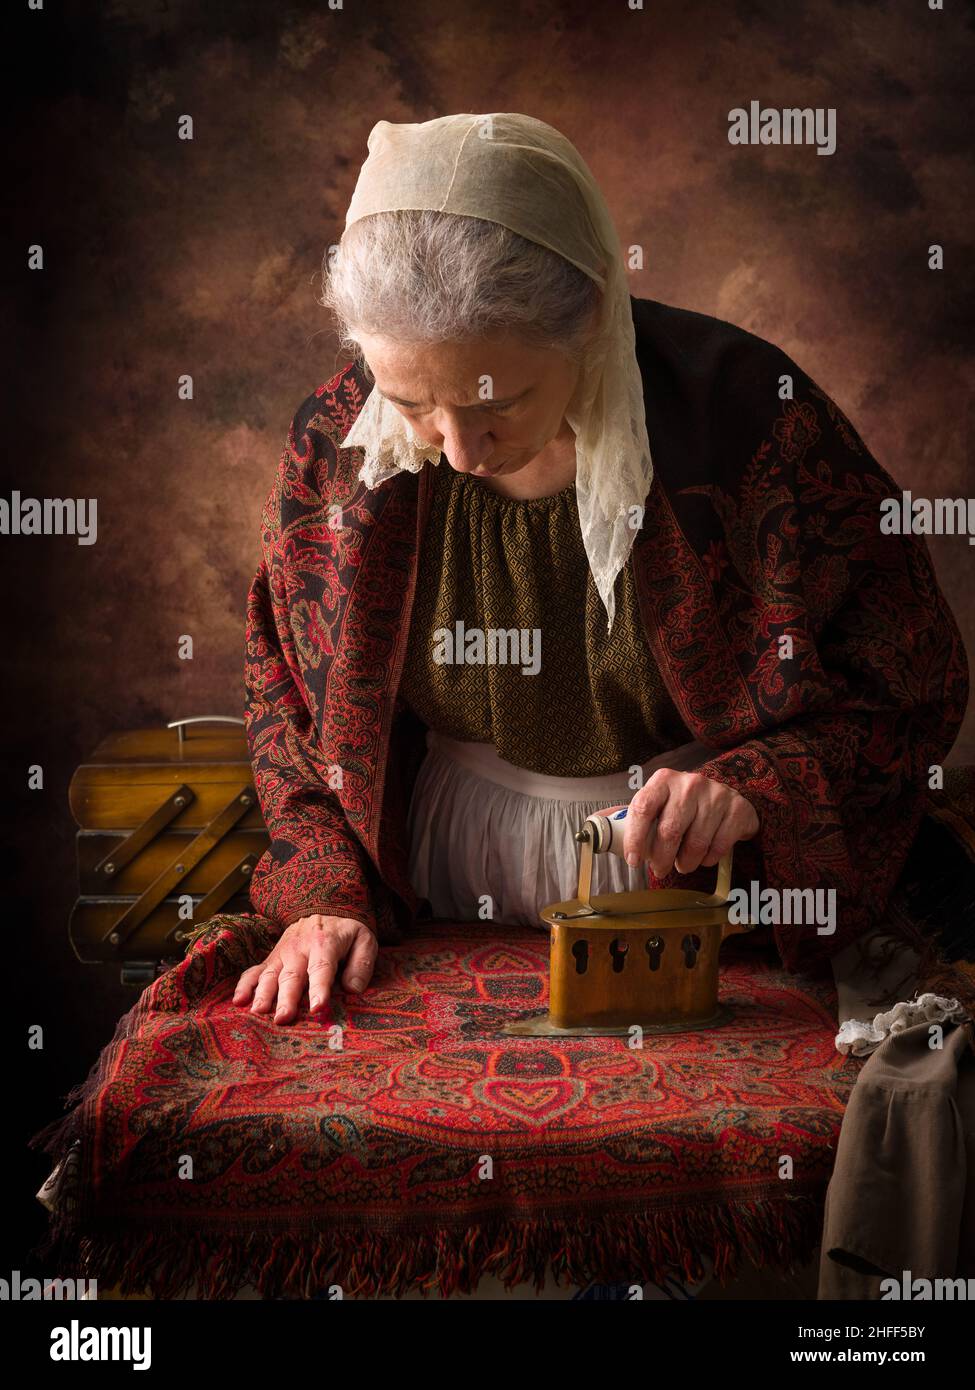 Old woman in victorian dress working with an antique charcoal iron on a board Stock Photo